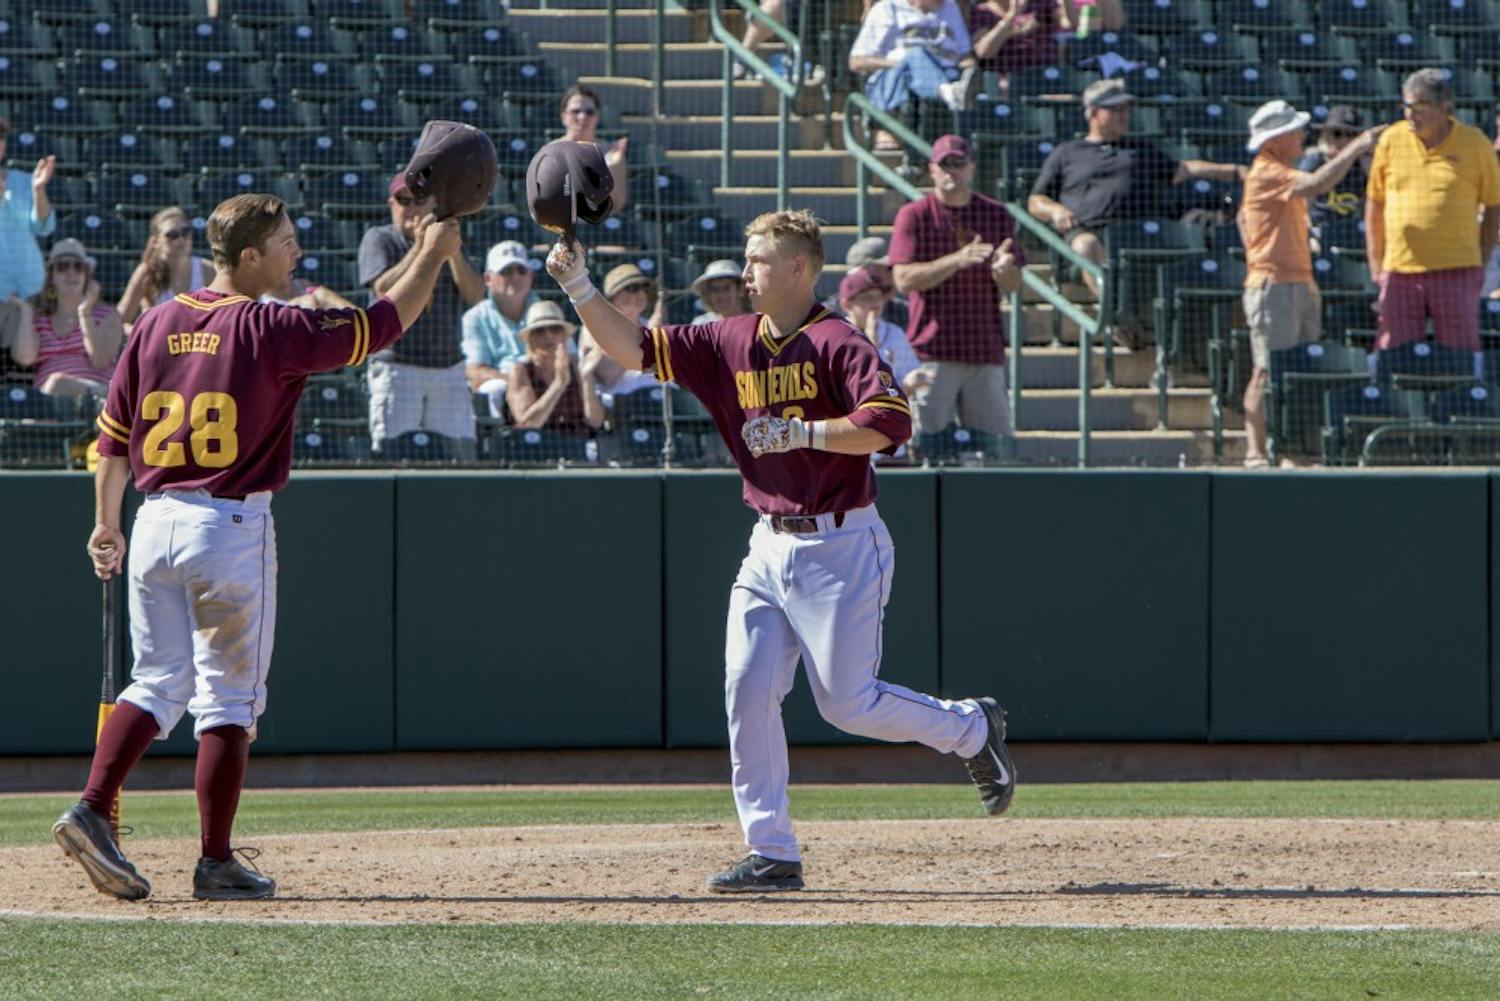 Sophomore Brian Serven (right) meets Sophomore David Greer (left) at home plate after hitting a home run against Long Beach State at Phoenix Municipal Stadium on Sunday March 08, 2015. The Sun Devils defeated the Dirtbags 9-3. (Jacob Stanek/The State Press)